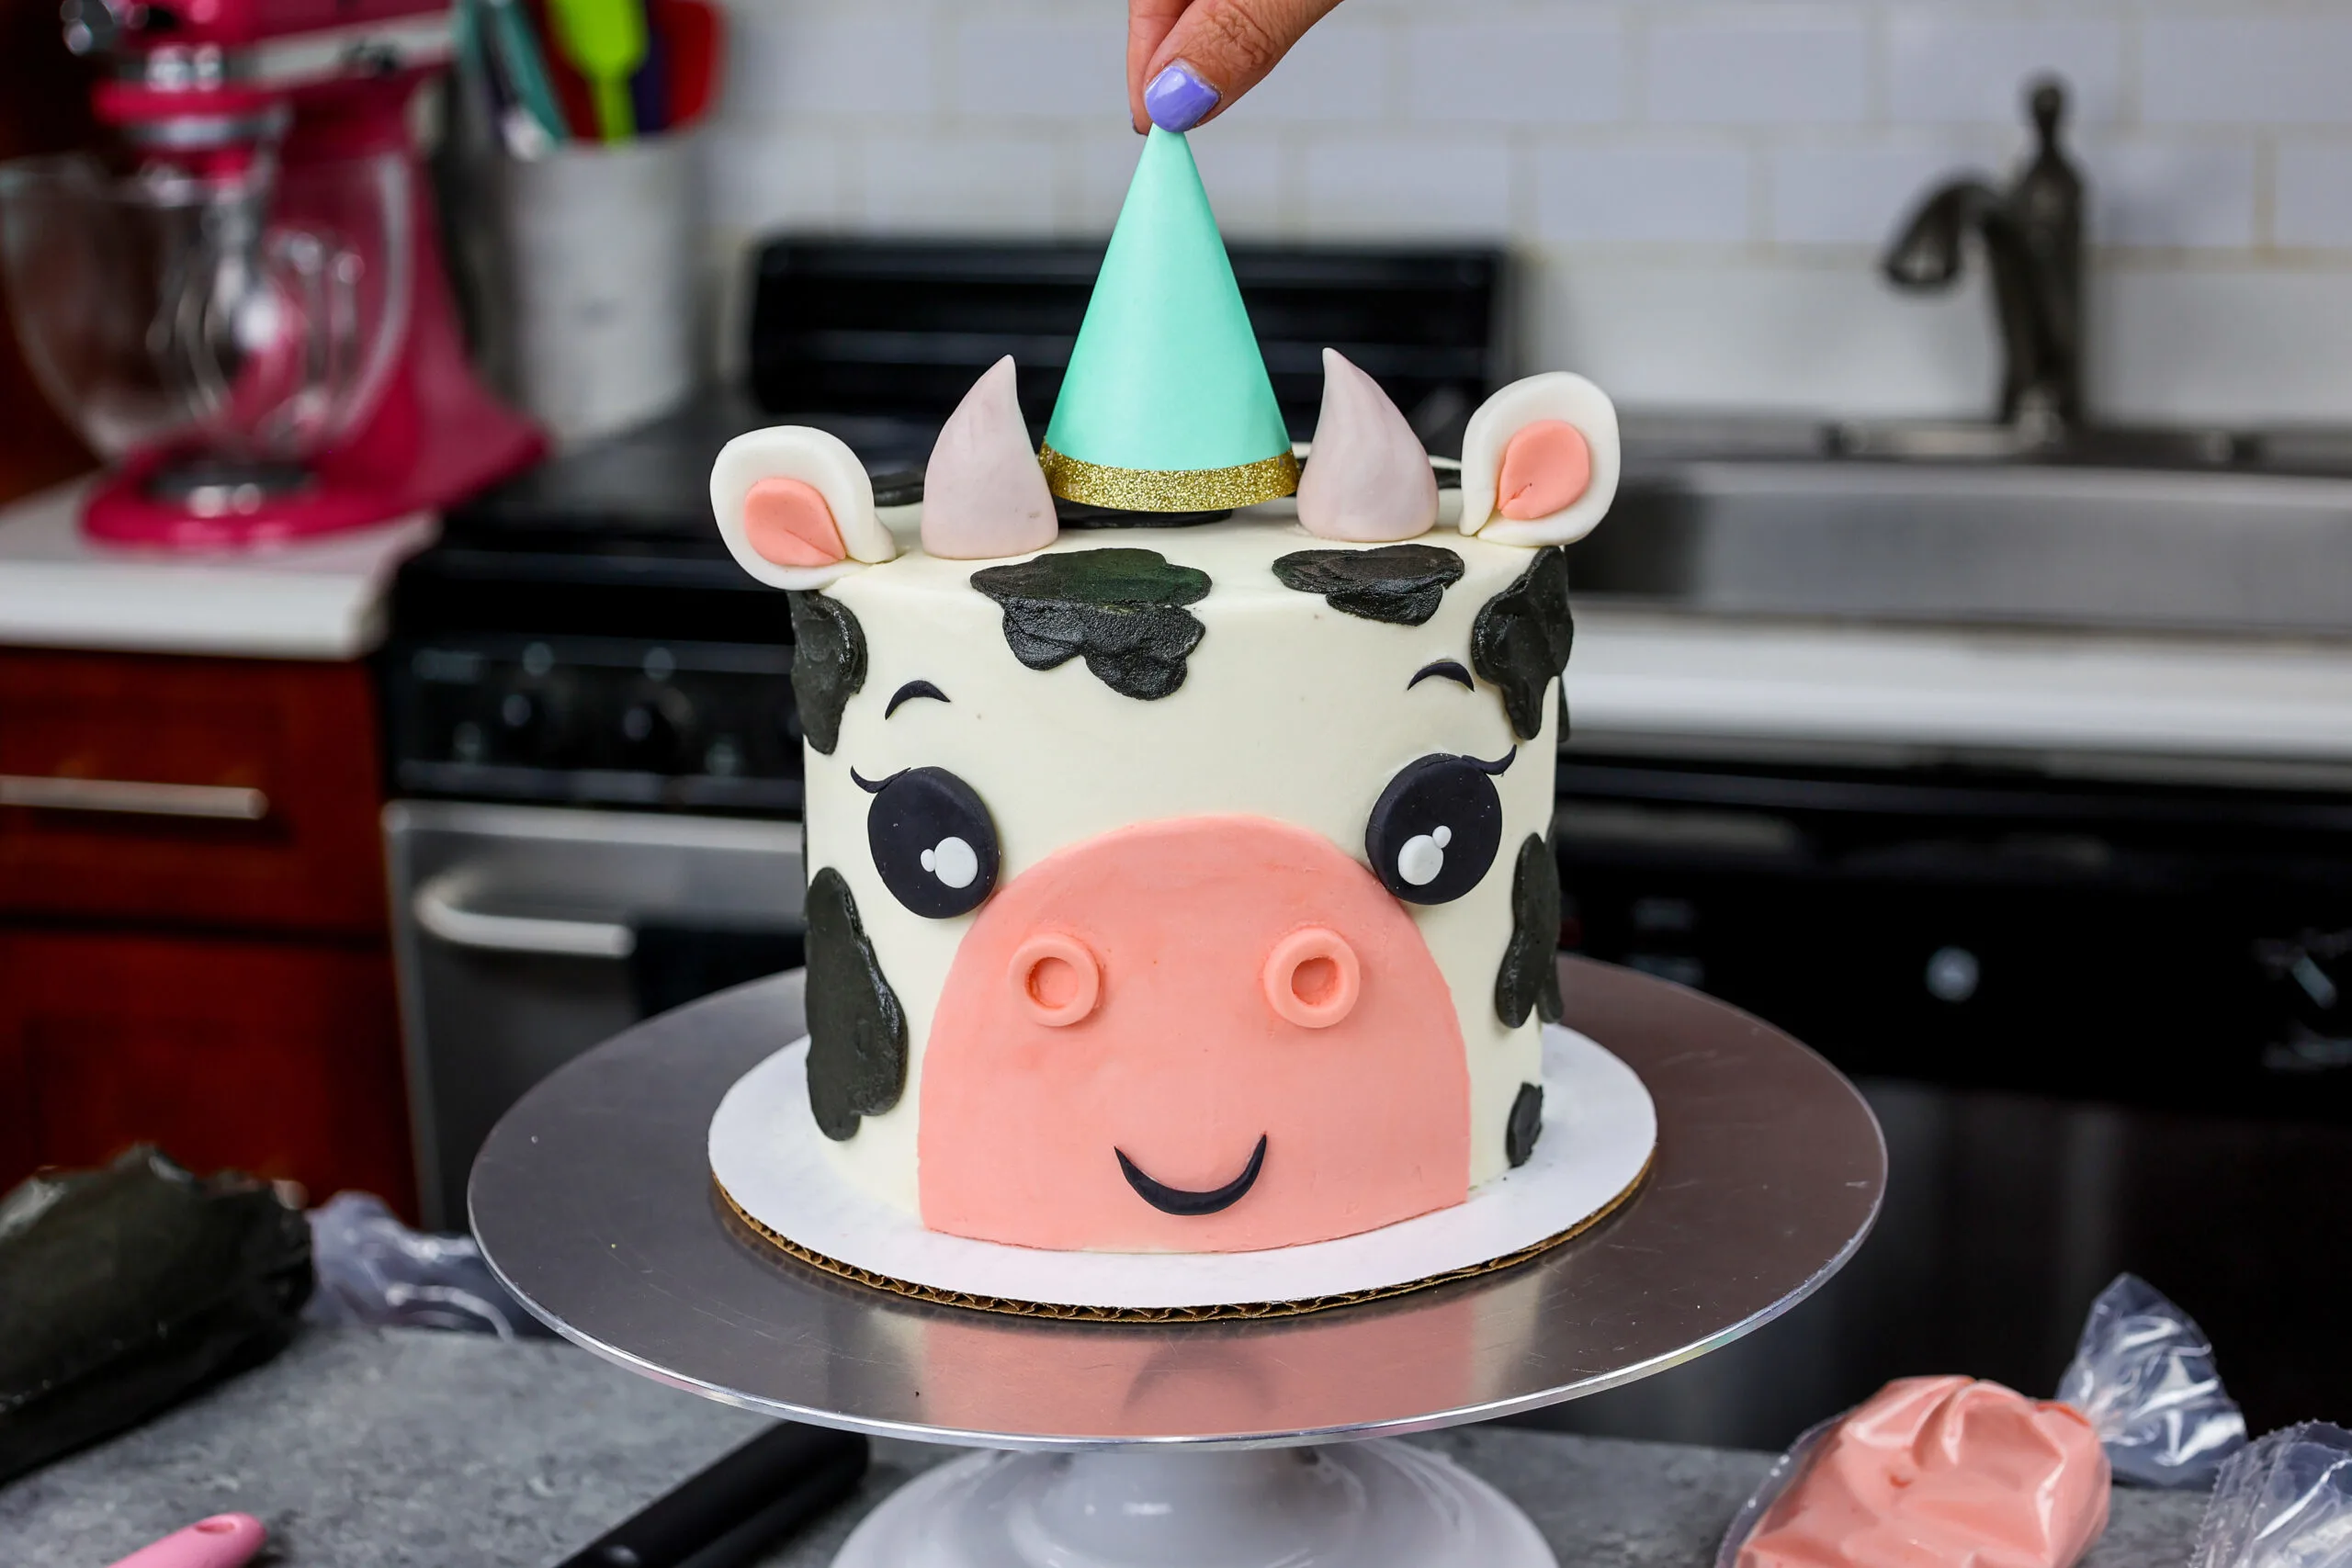 image of an adorable cow birthday cake made with marbled chocolate and vanilla cake layers and topped with a cute little party hat